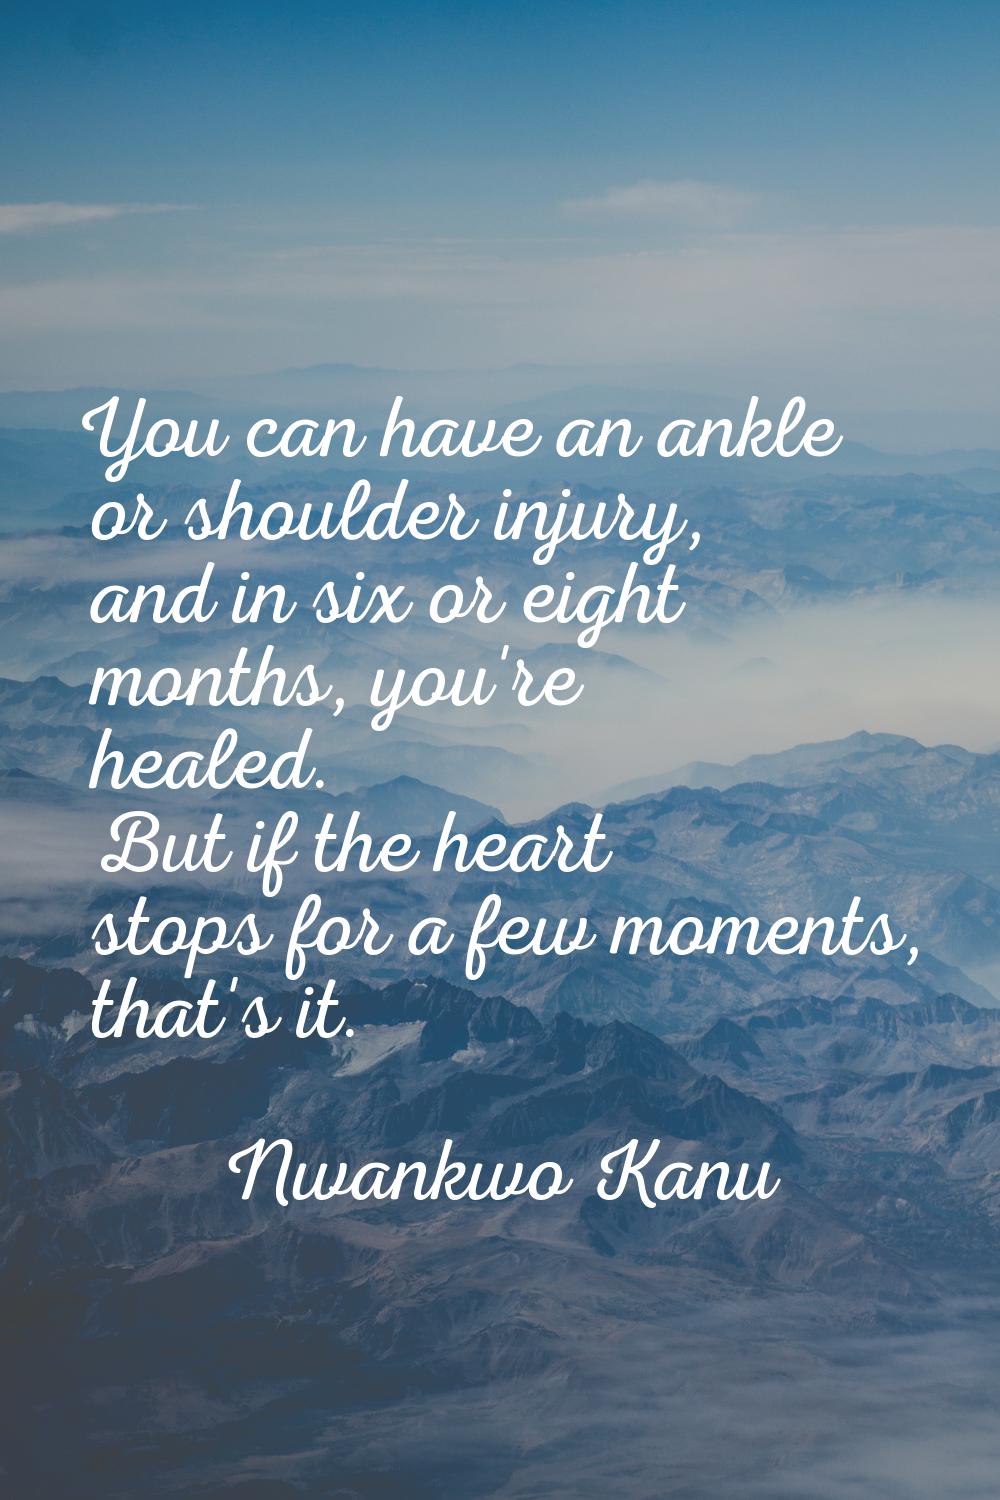 You can have an ankle or shoulder injury, and in six or eight months, you're healed. But if the hea